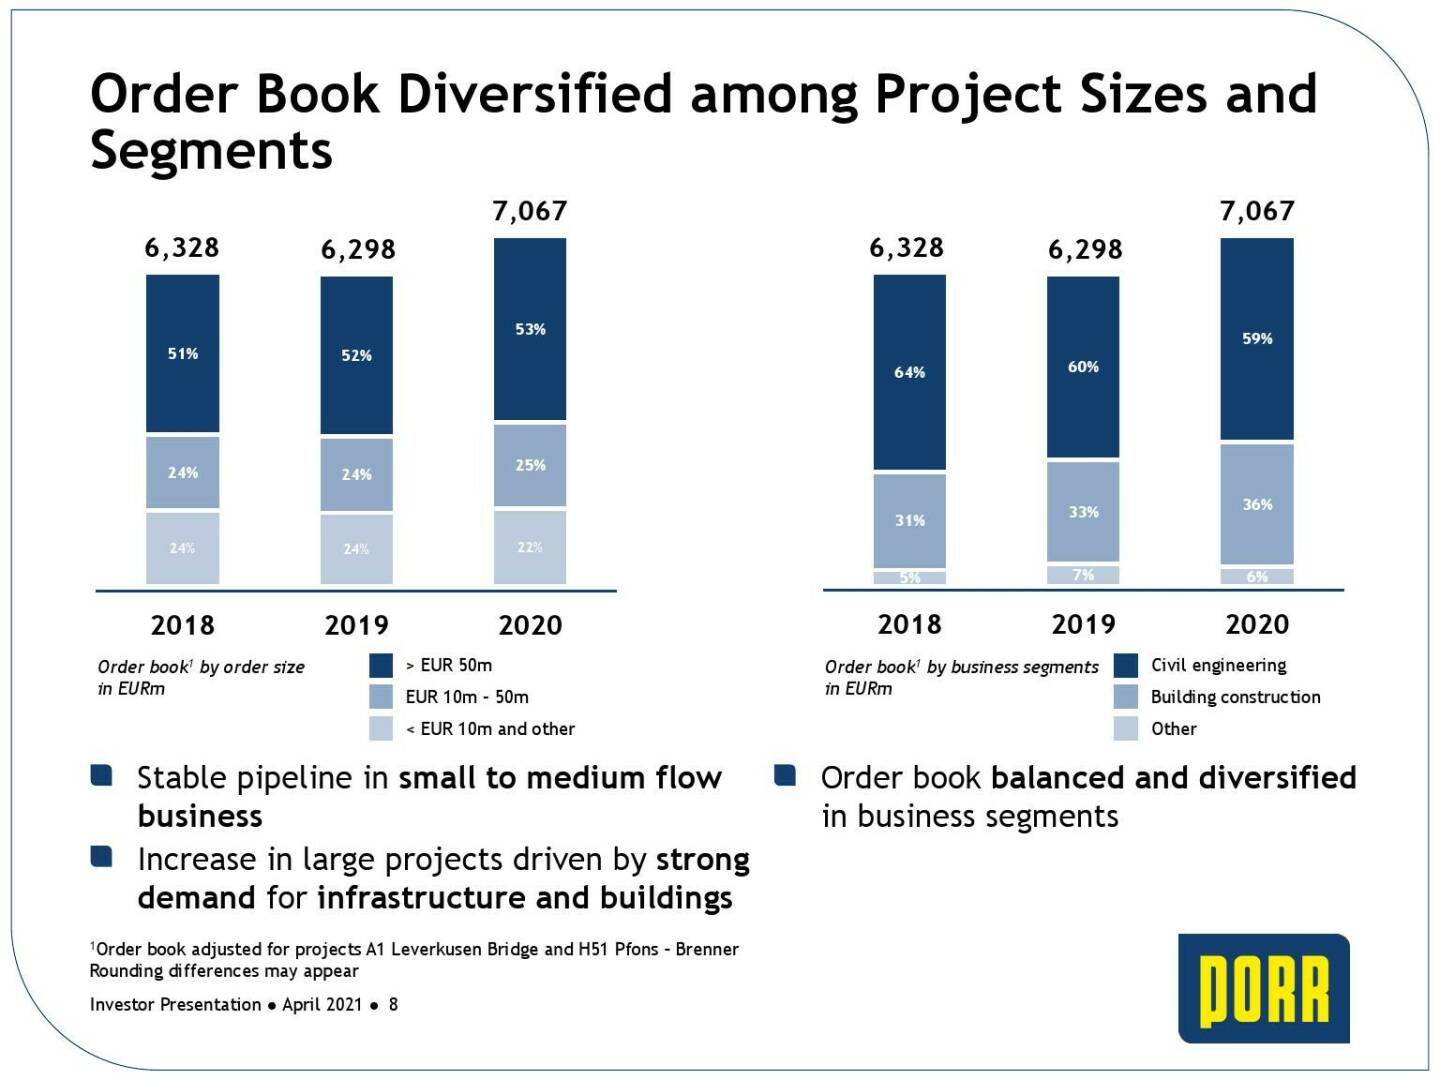 Porr - Order book diversified among project sizes and segments